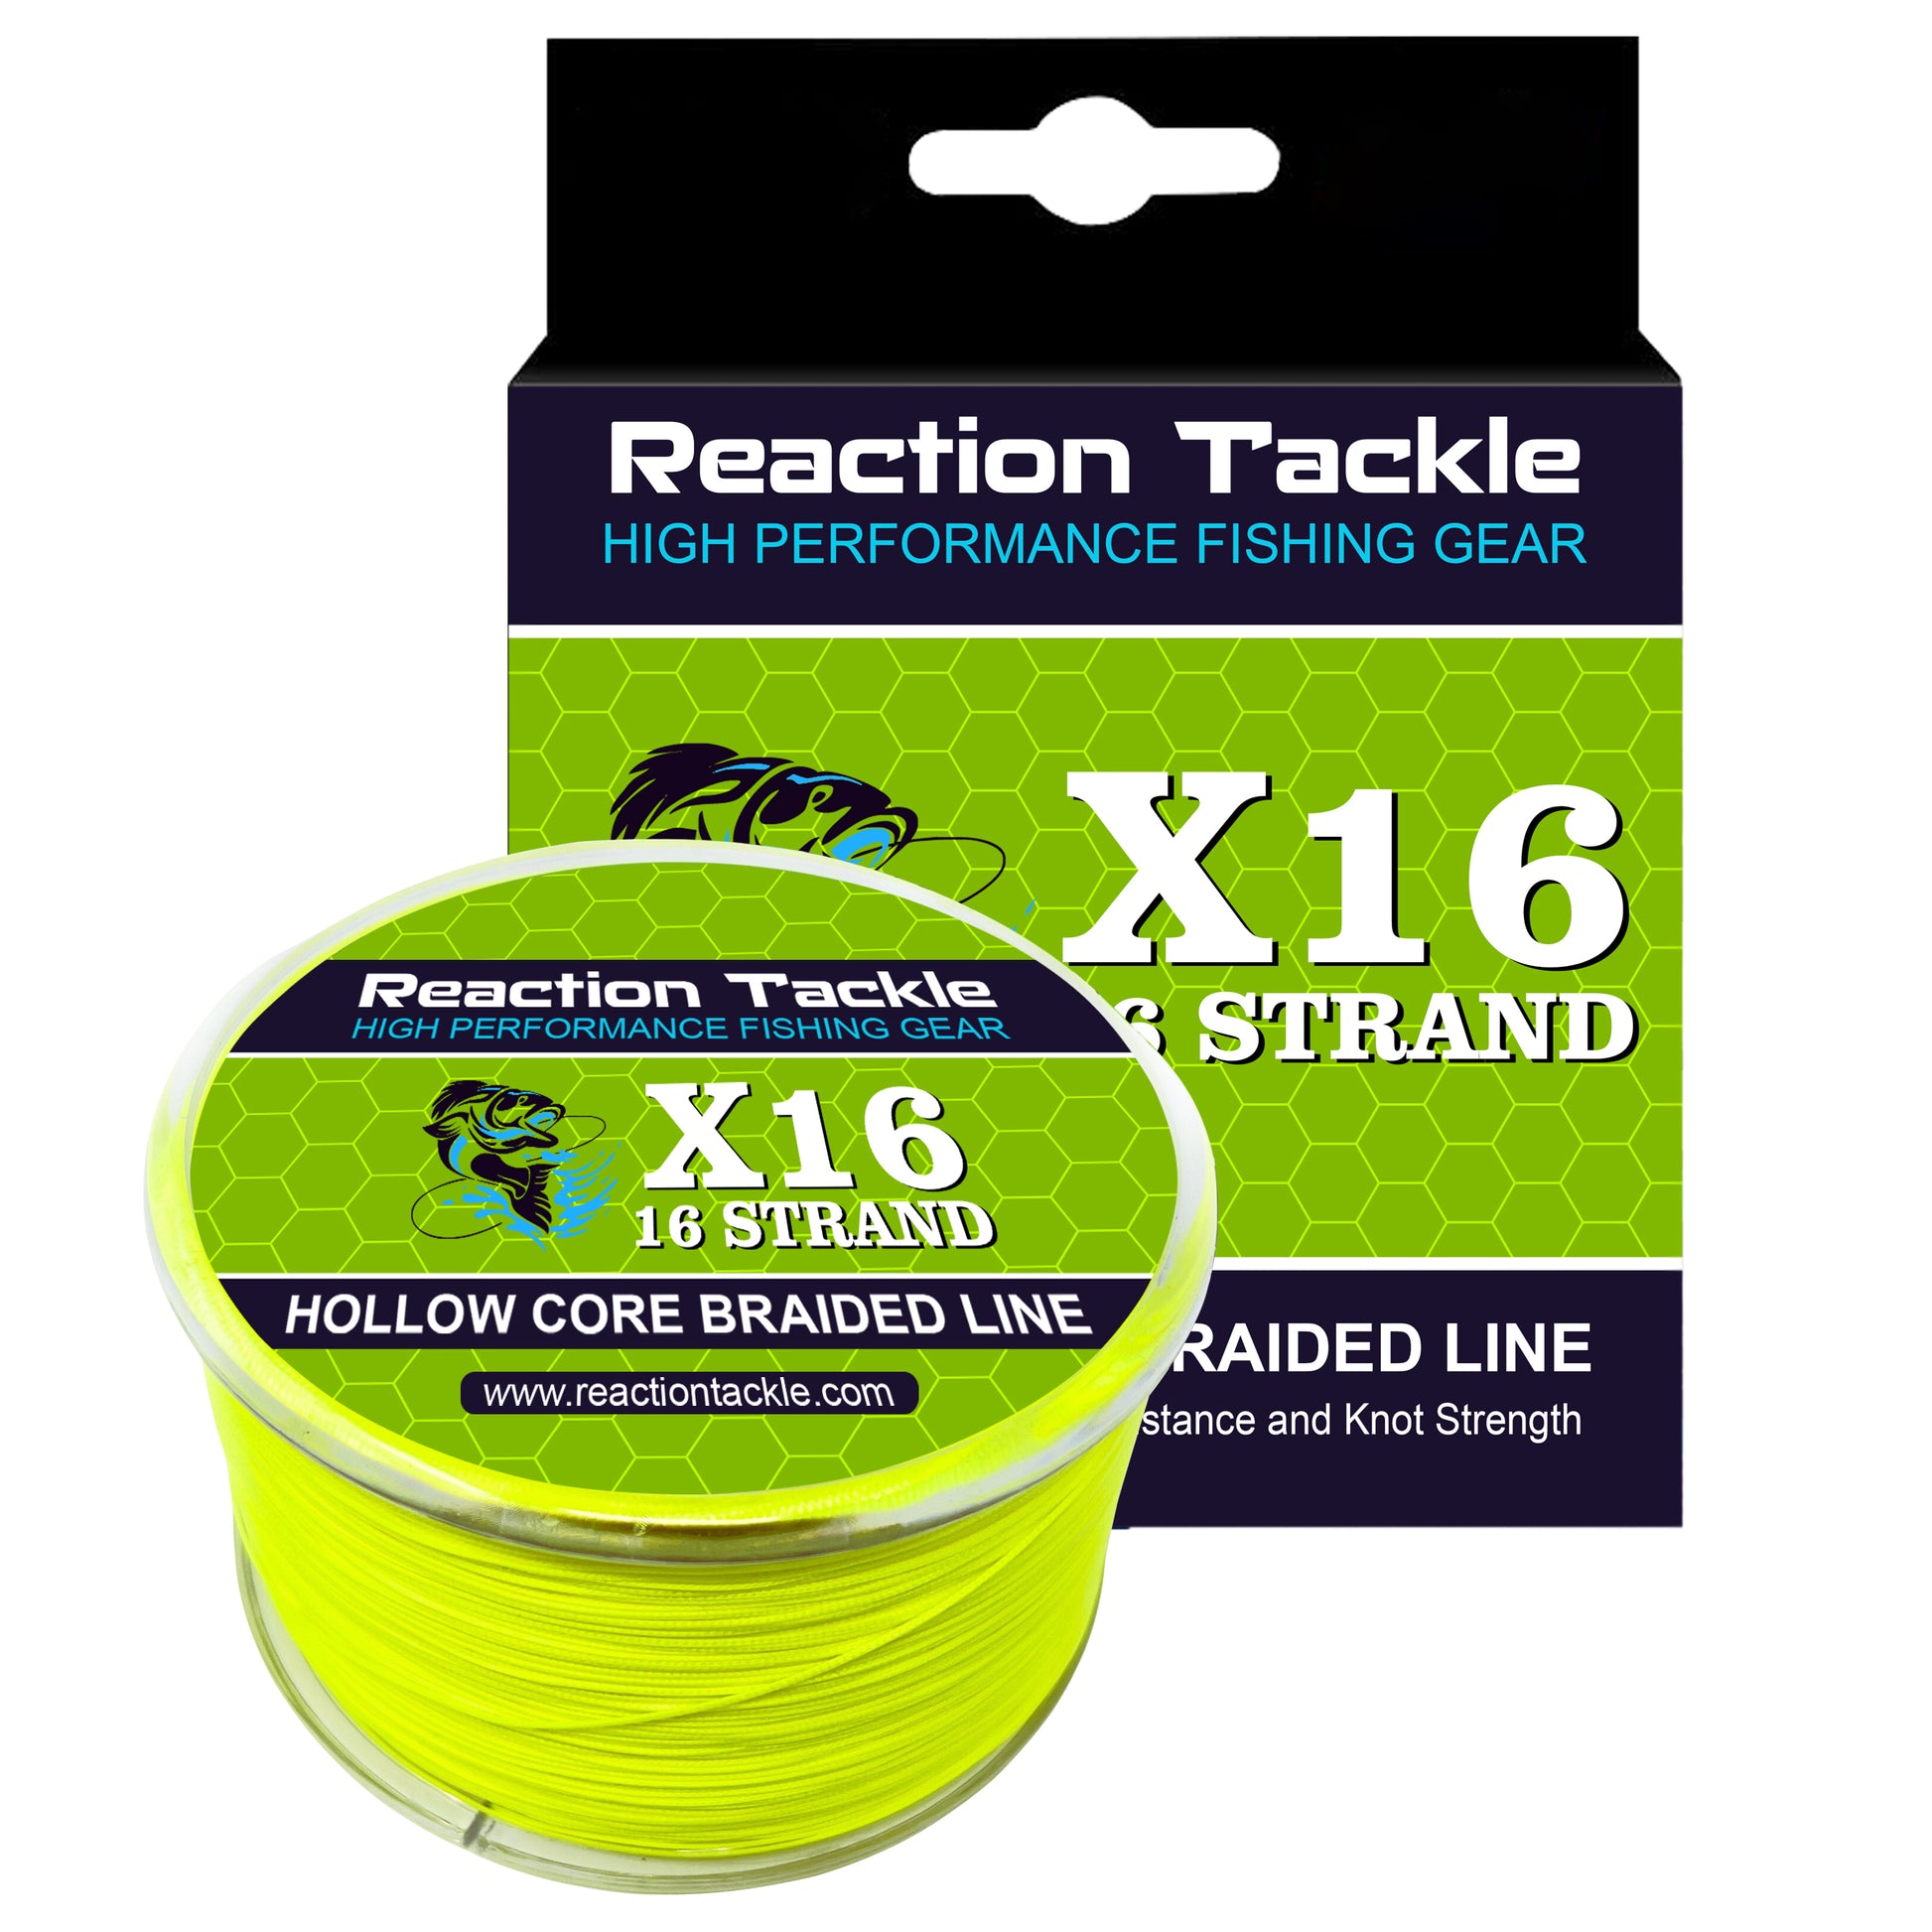 Reaction Tackle 4 Strand Braided Fishing Line - Timber Brown – 3rd